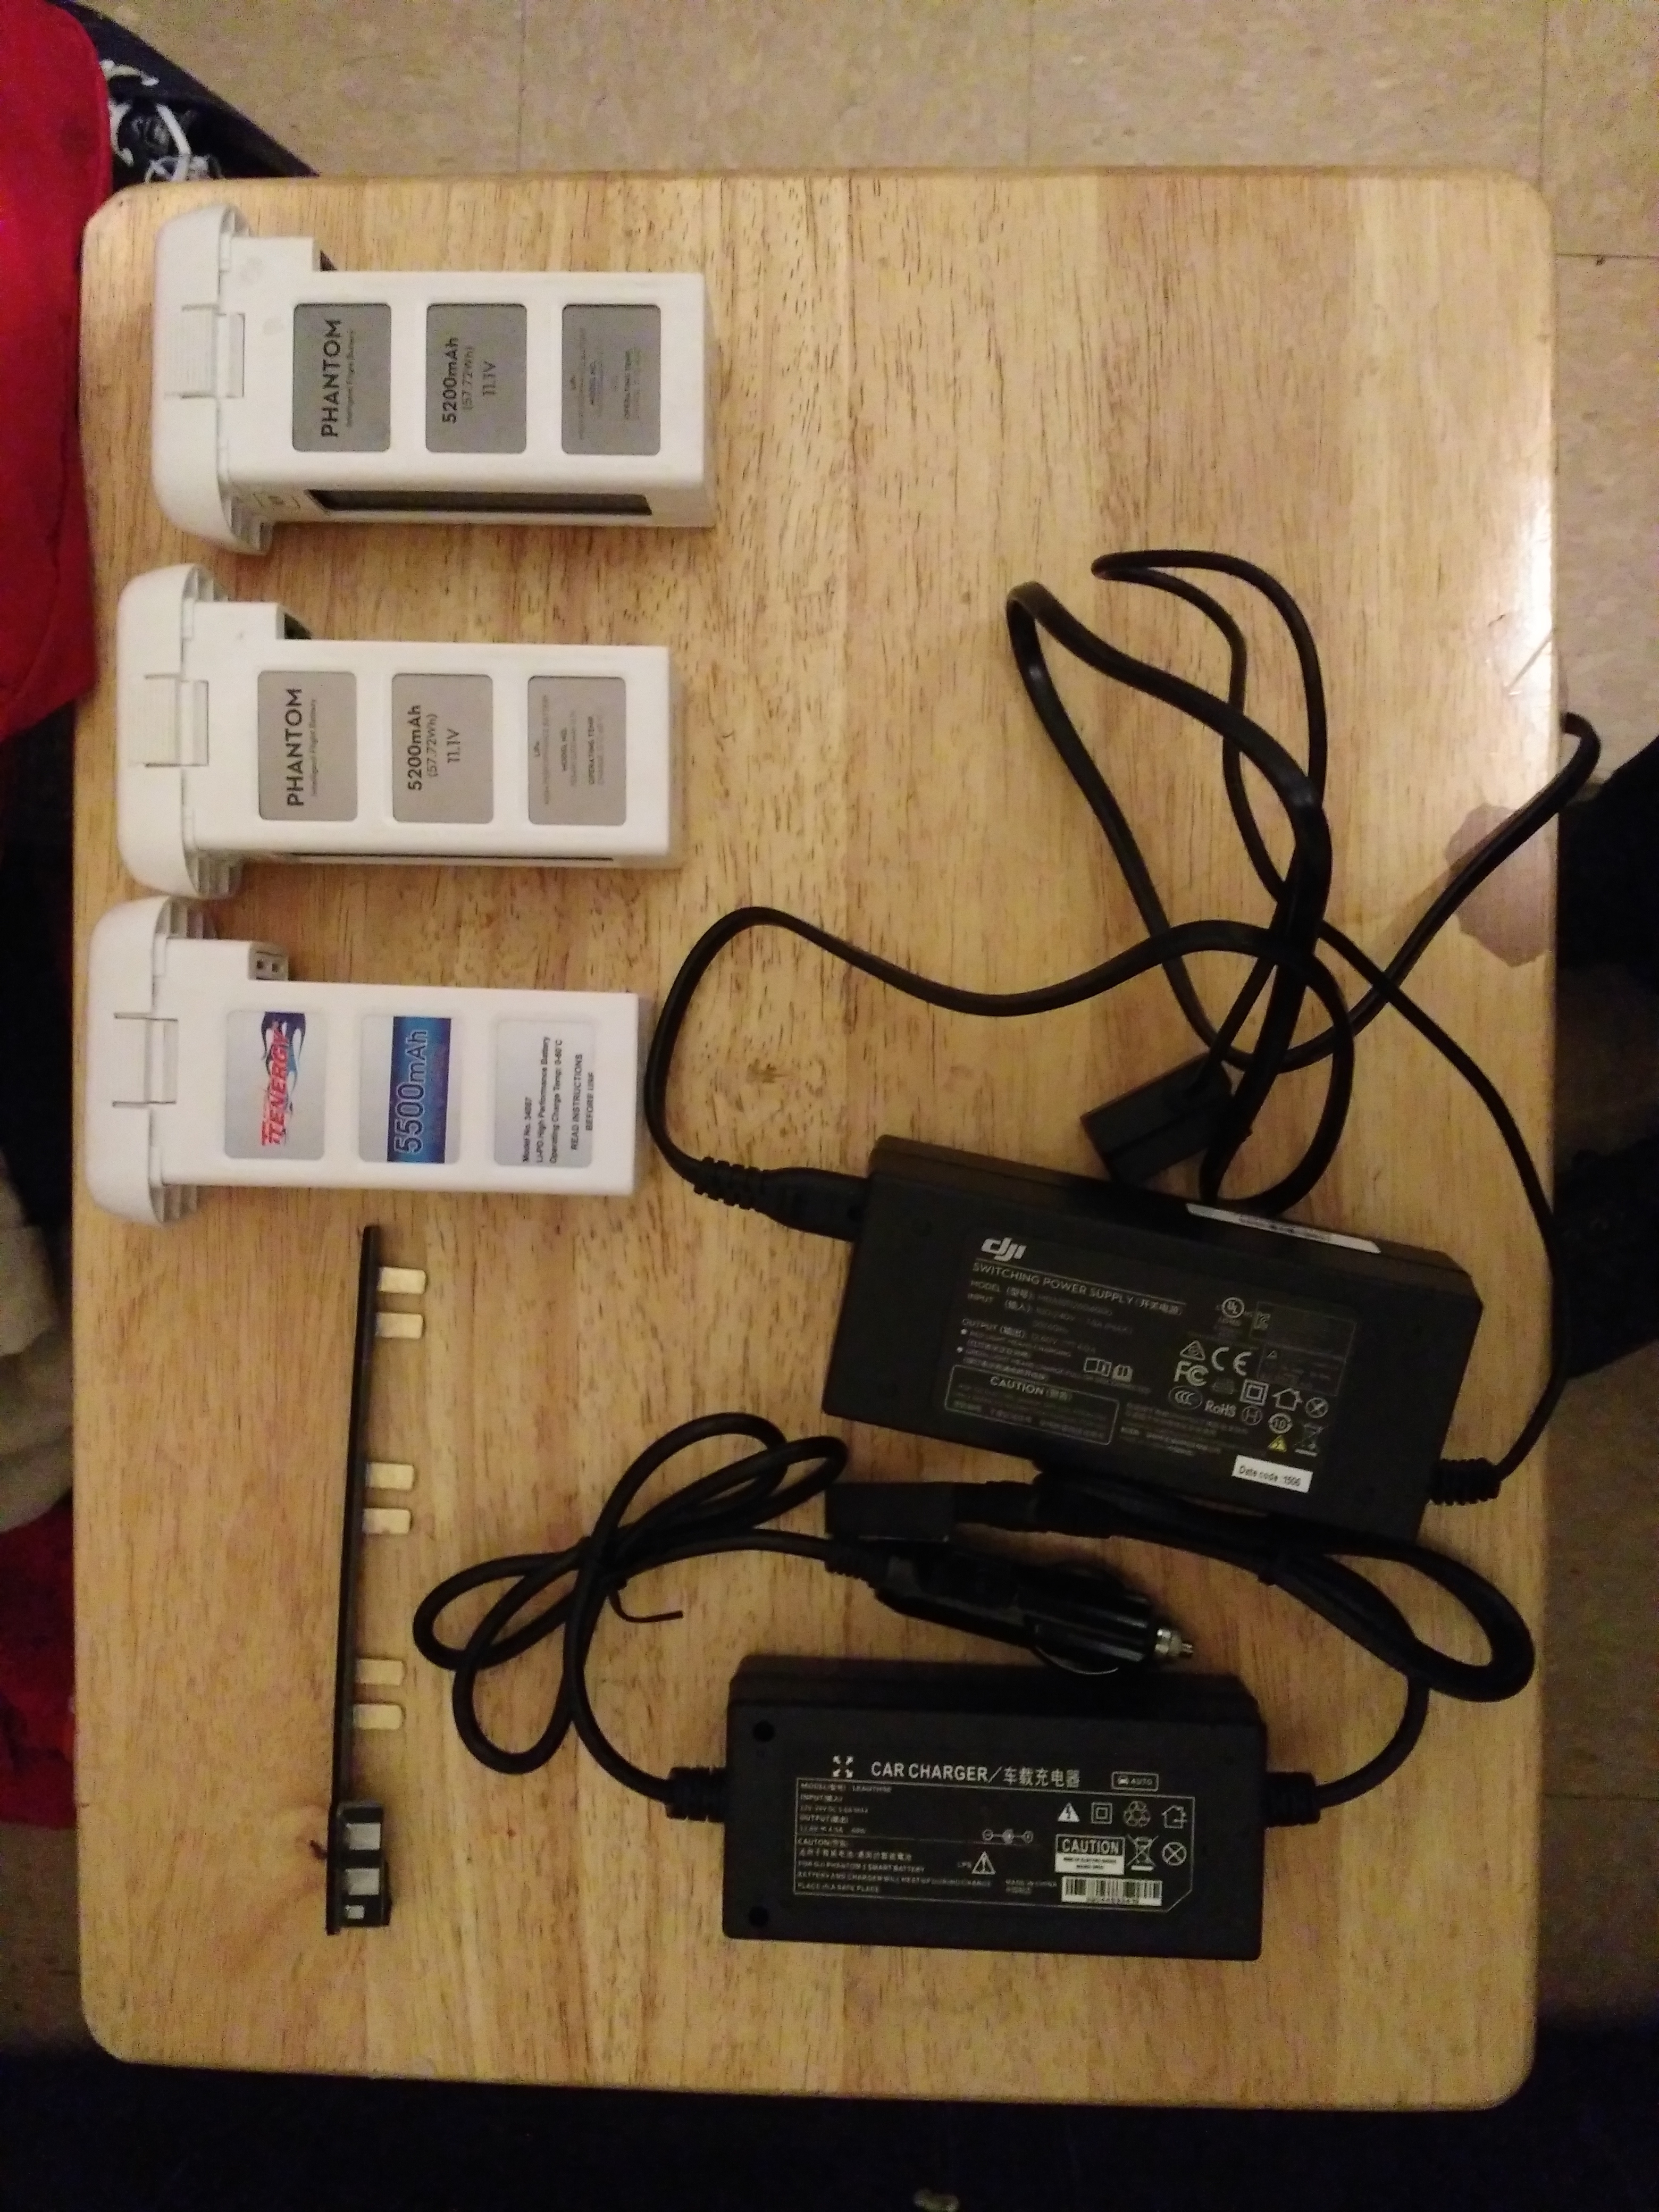 batteries and chargers.jpg